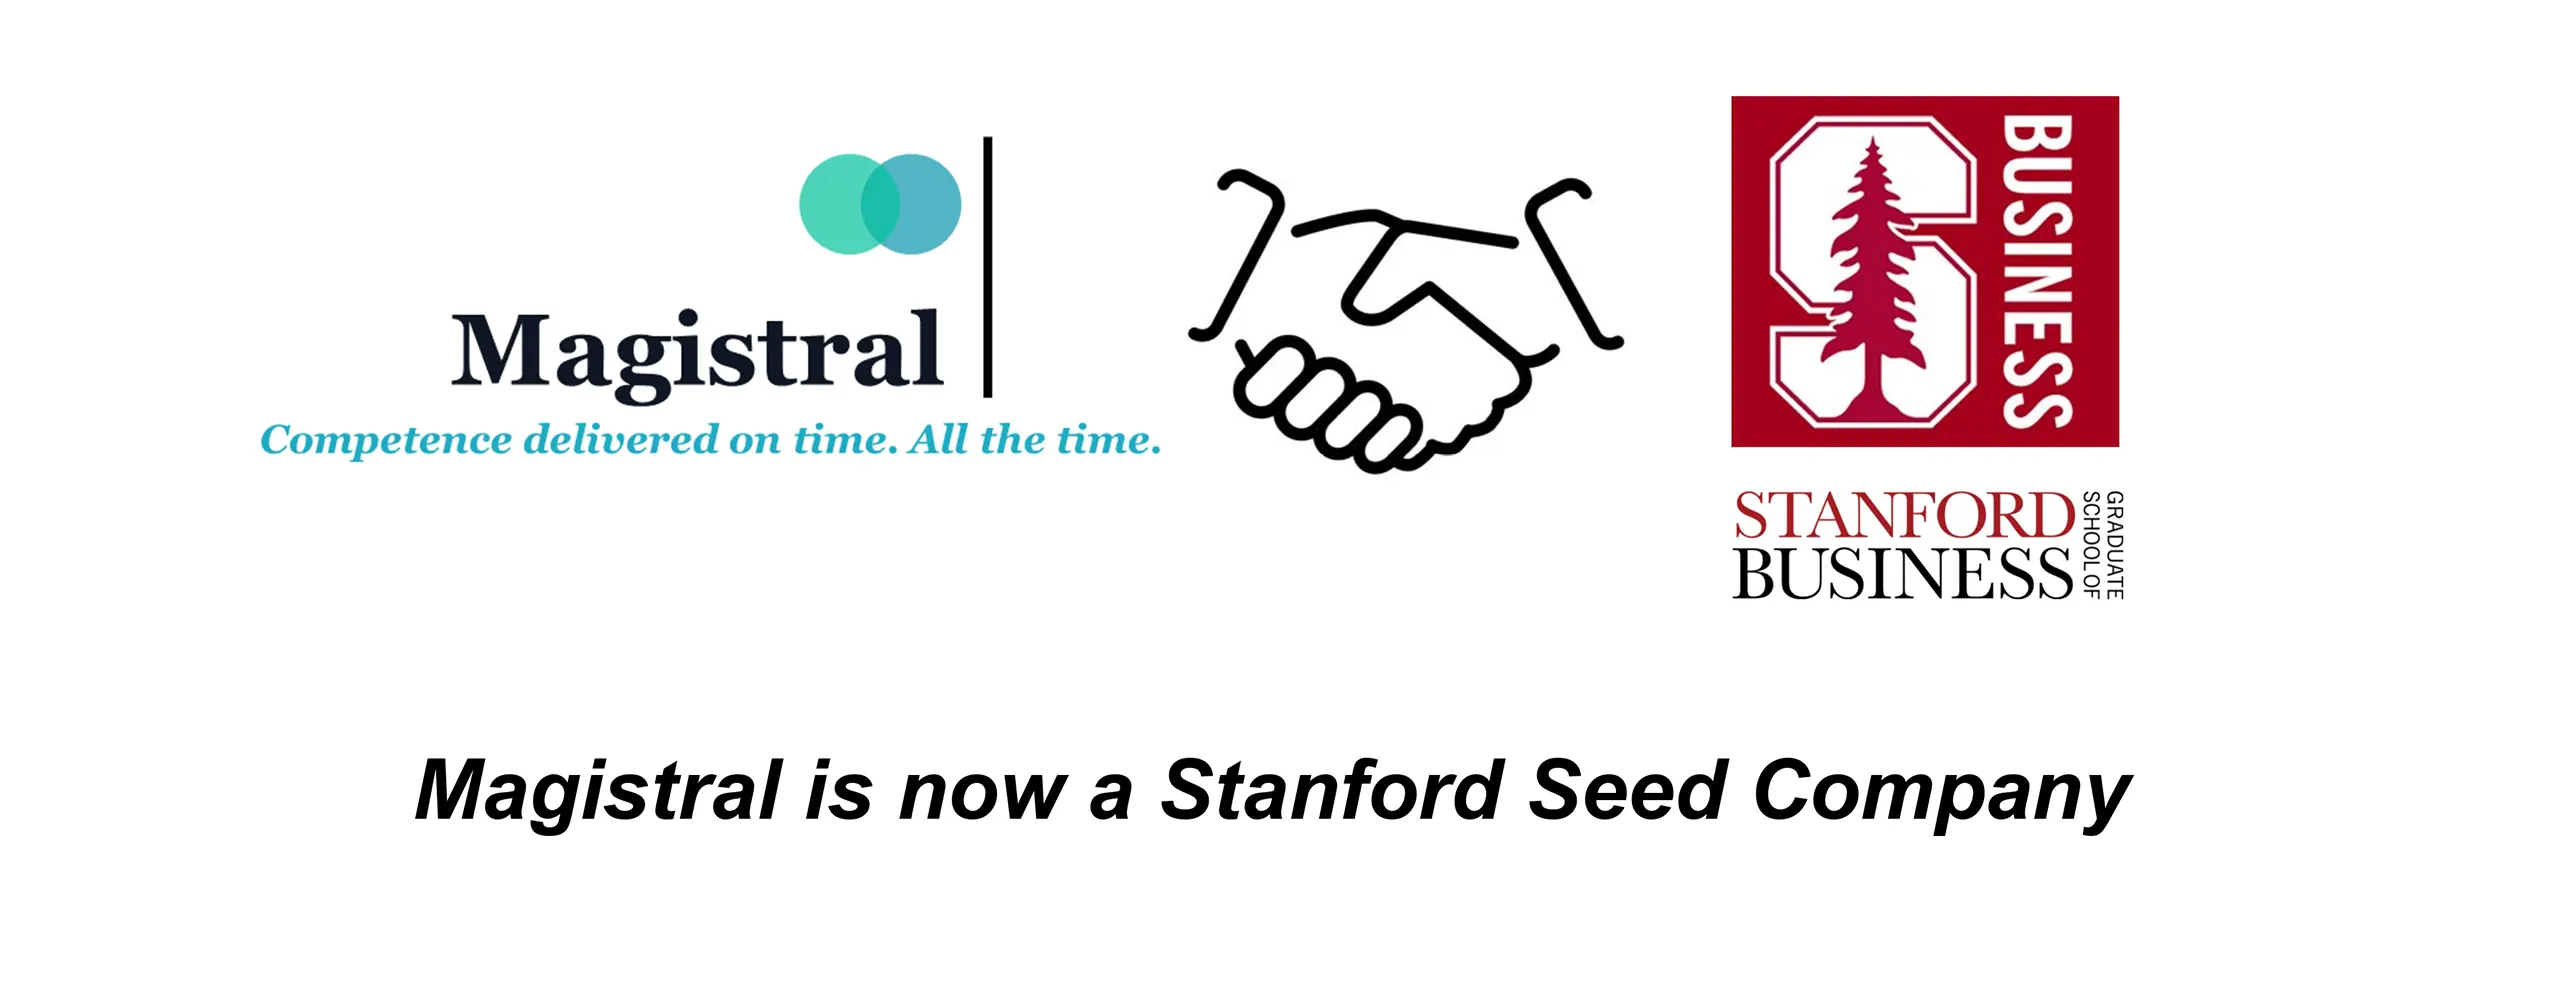 magistral is a now a stanford seed company